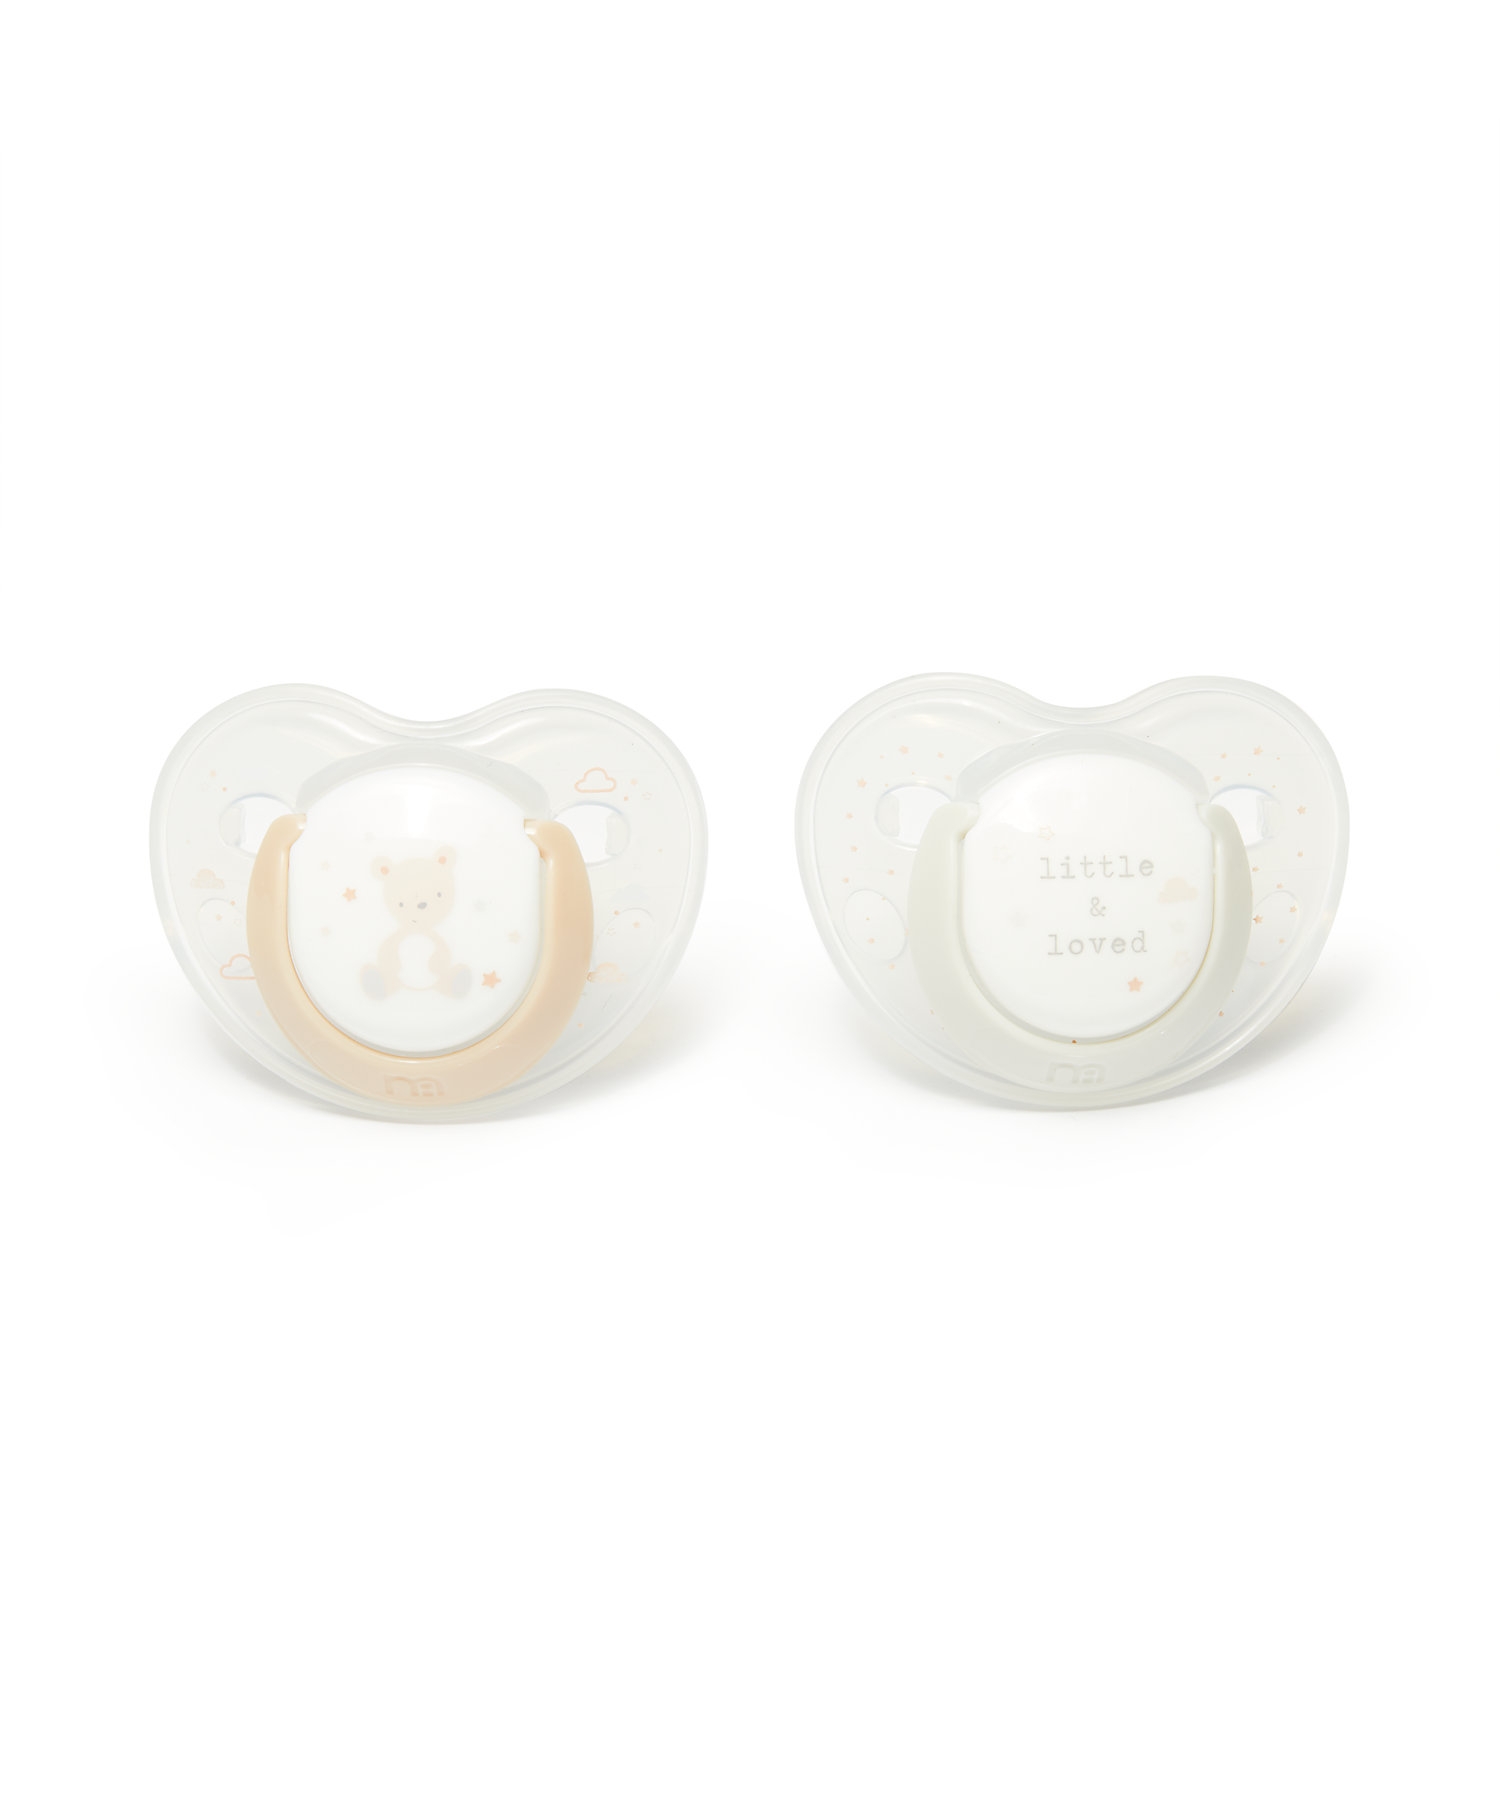 Mothercare | Mothercare Little And Loved Soother 0-6Months - 2 Pack